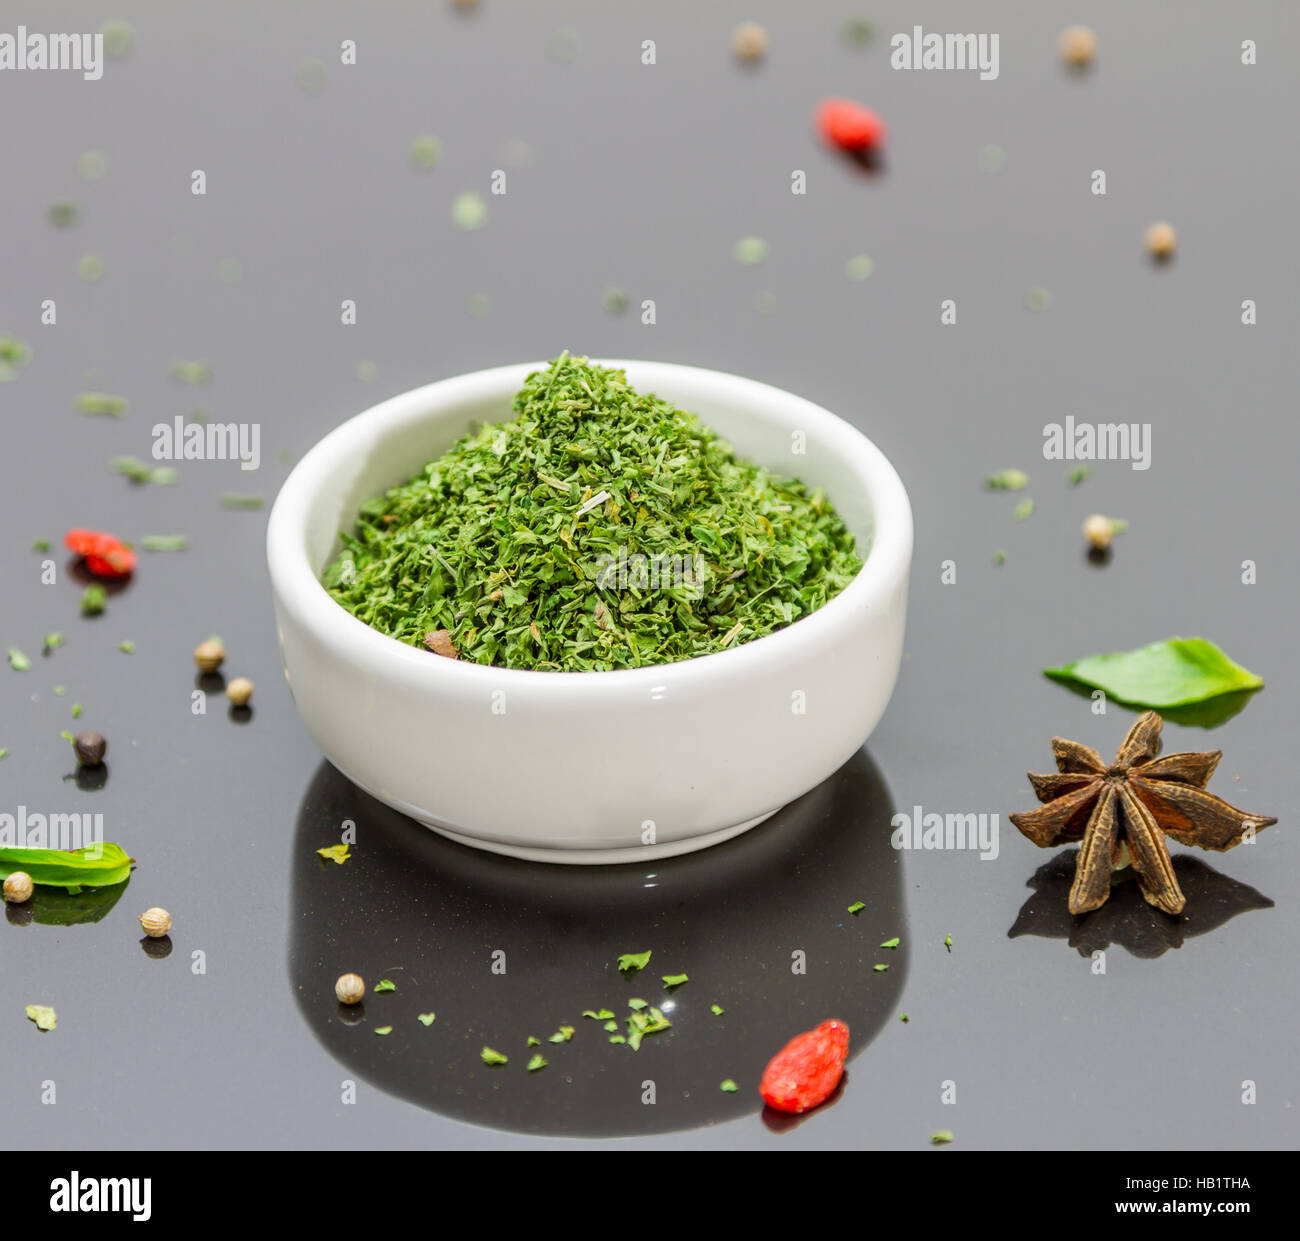 Green parsley in the backgroud. Stock Photo